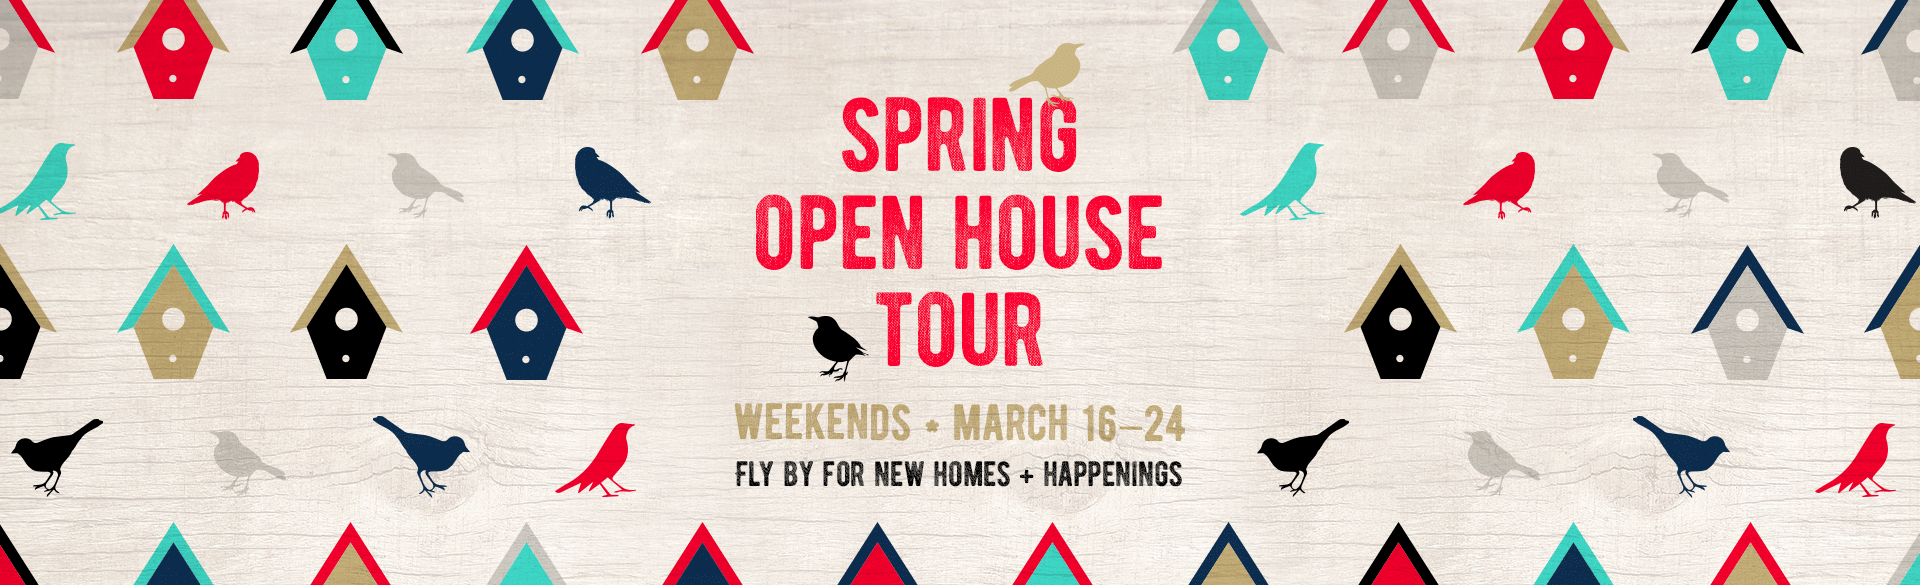 Spring Open House Tour promotion at Wendell Community in Wendell, NC